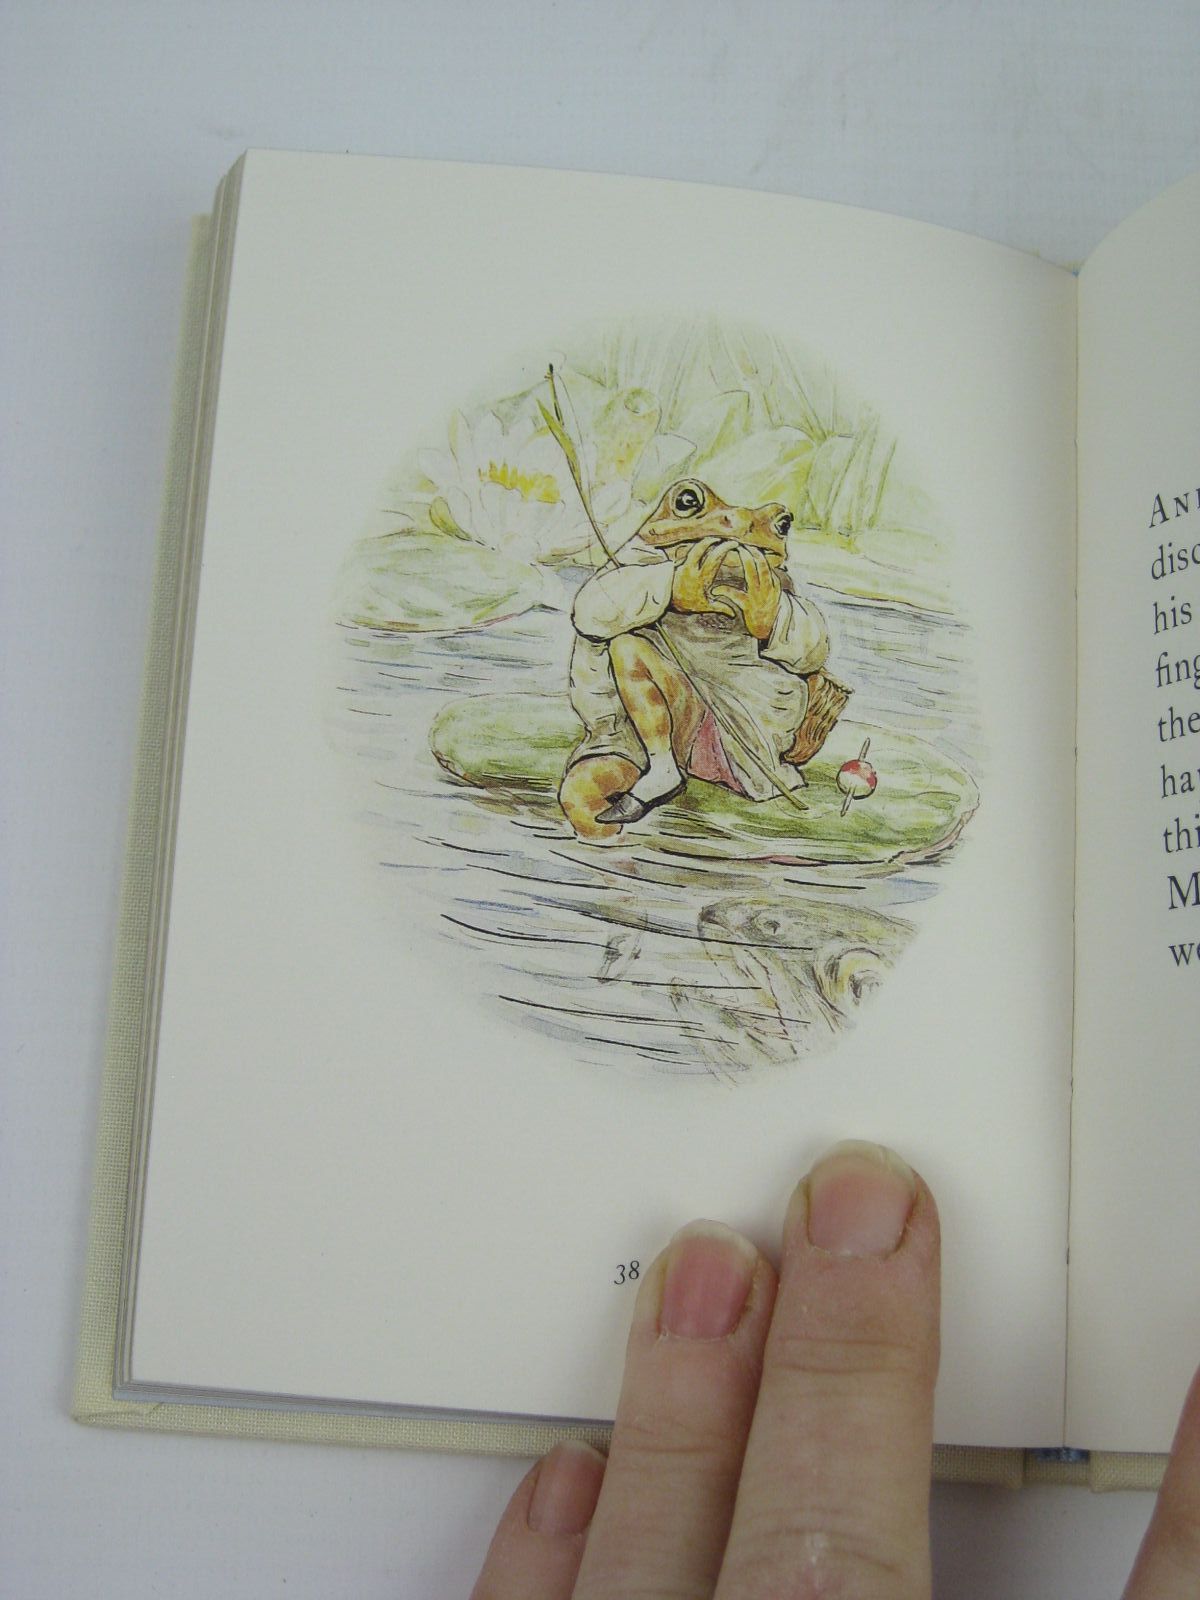 Photo of THE TALE OF MR. JEREMY FISHER written by Potter, Beatrix illustrated by Potter, Beatrix published by Frederick Warne, The Penguin Group (STOCK CODE: 1316349)  for sale by Stella & Rose's Books